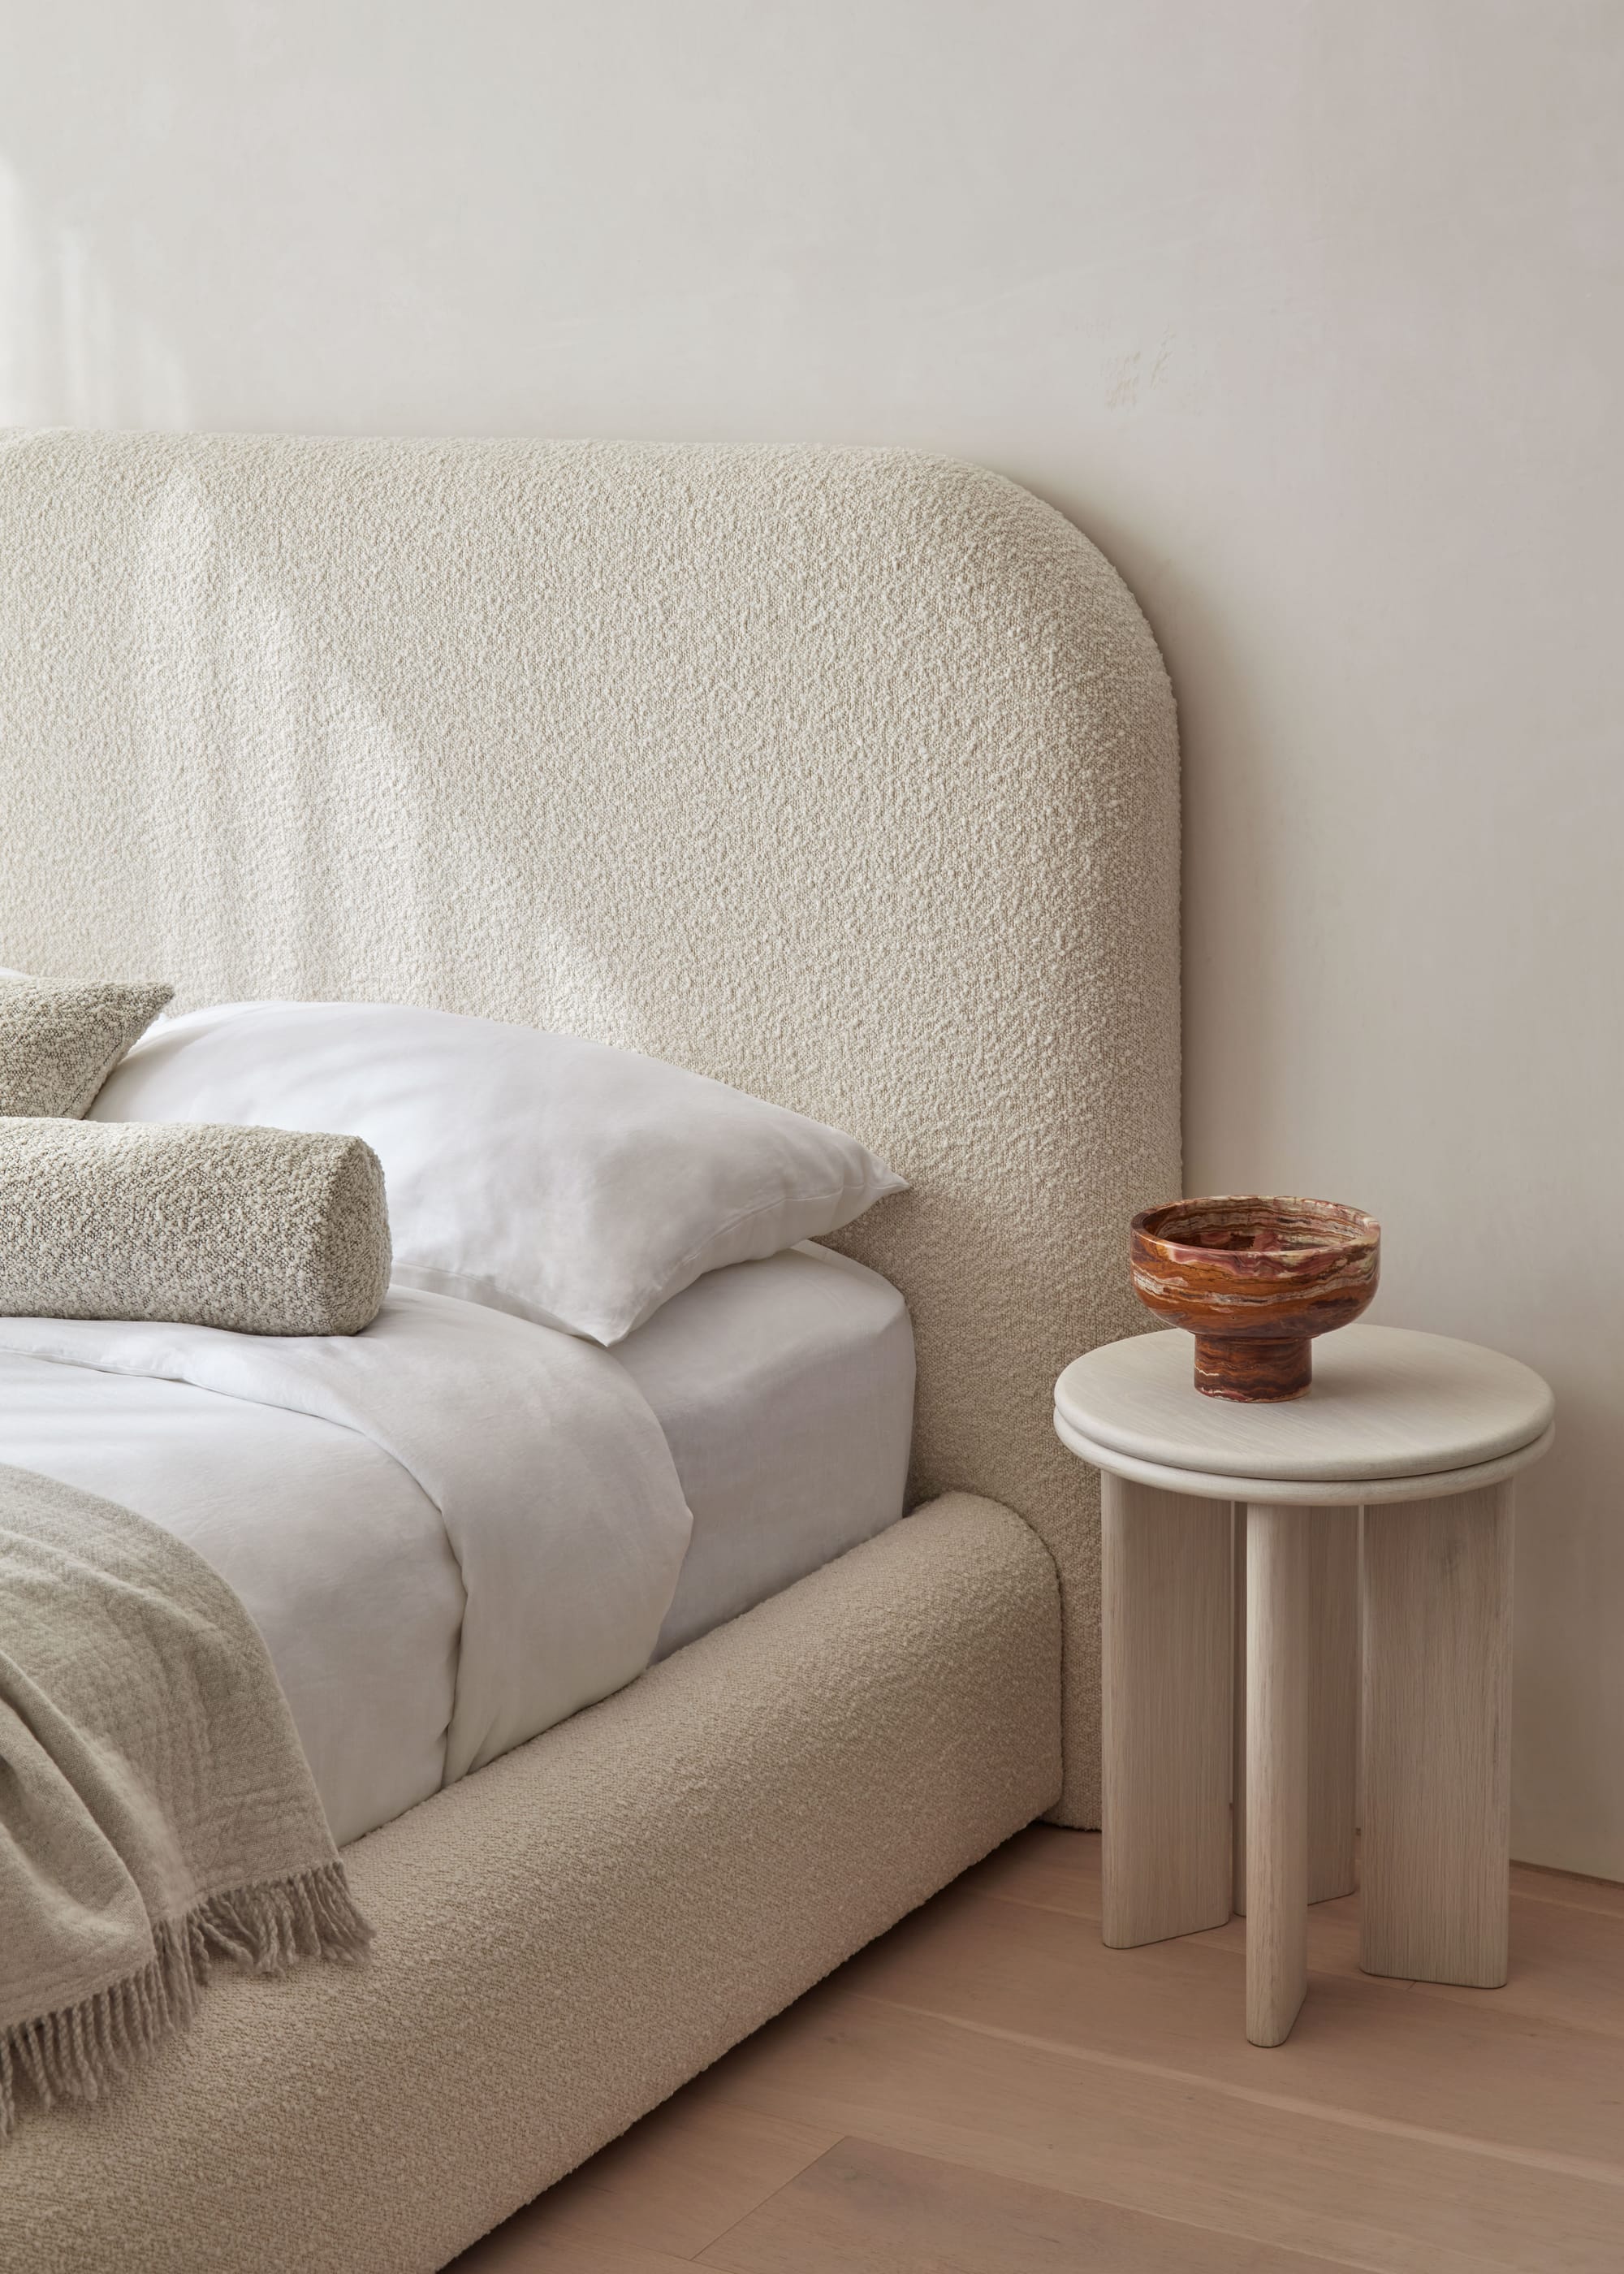 Zenn Design showing bed head and bedside table